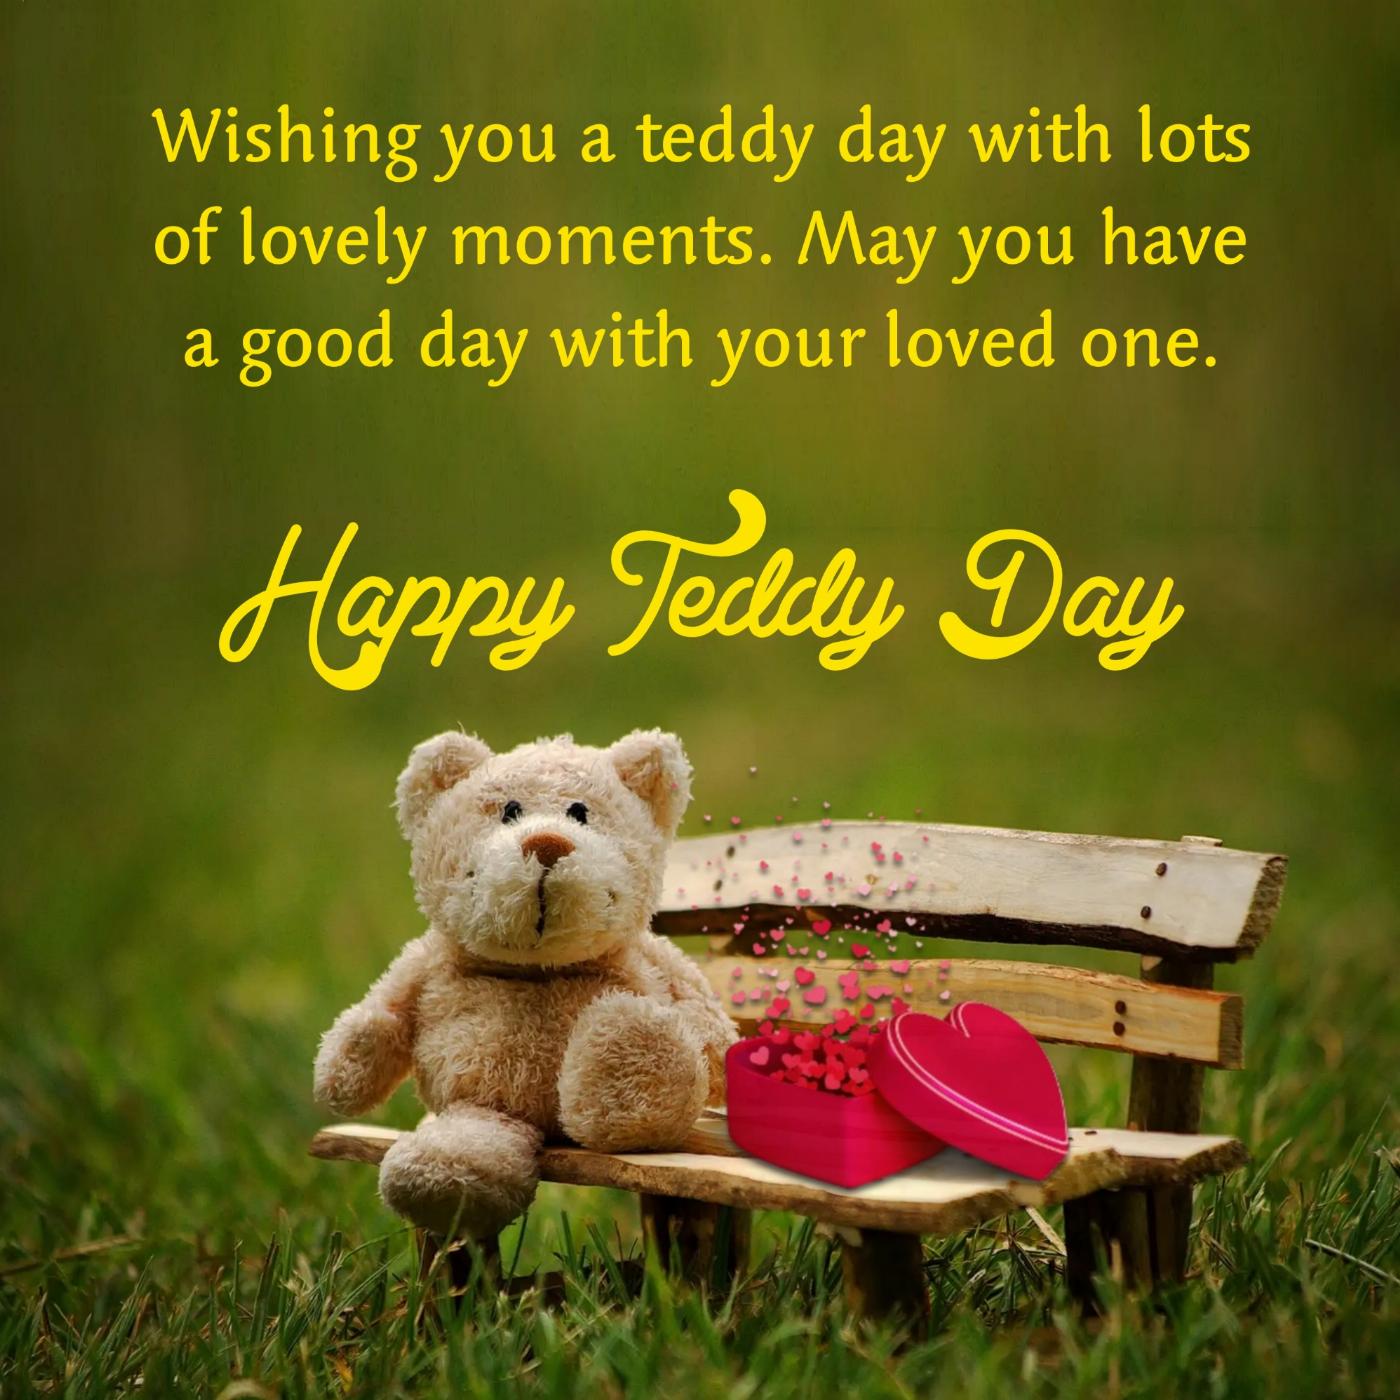 Wishing you a teddy day with lots of lovely moments